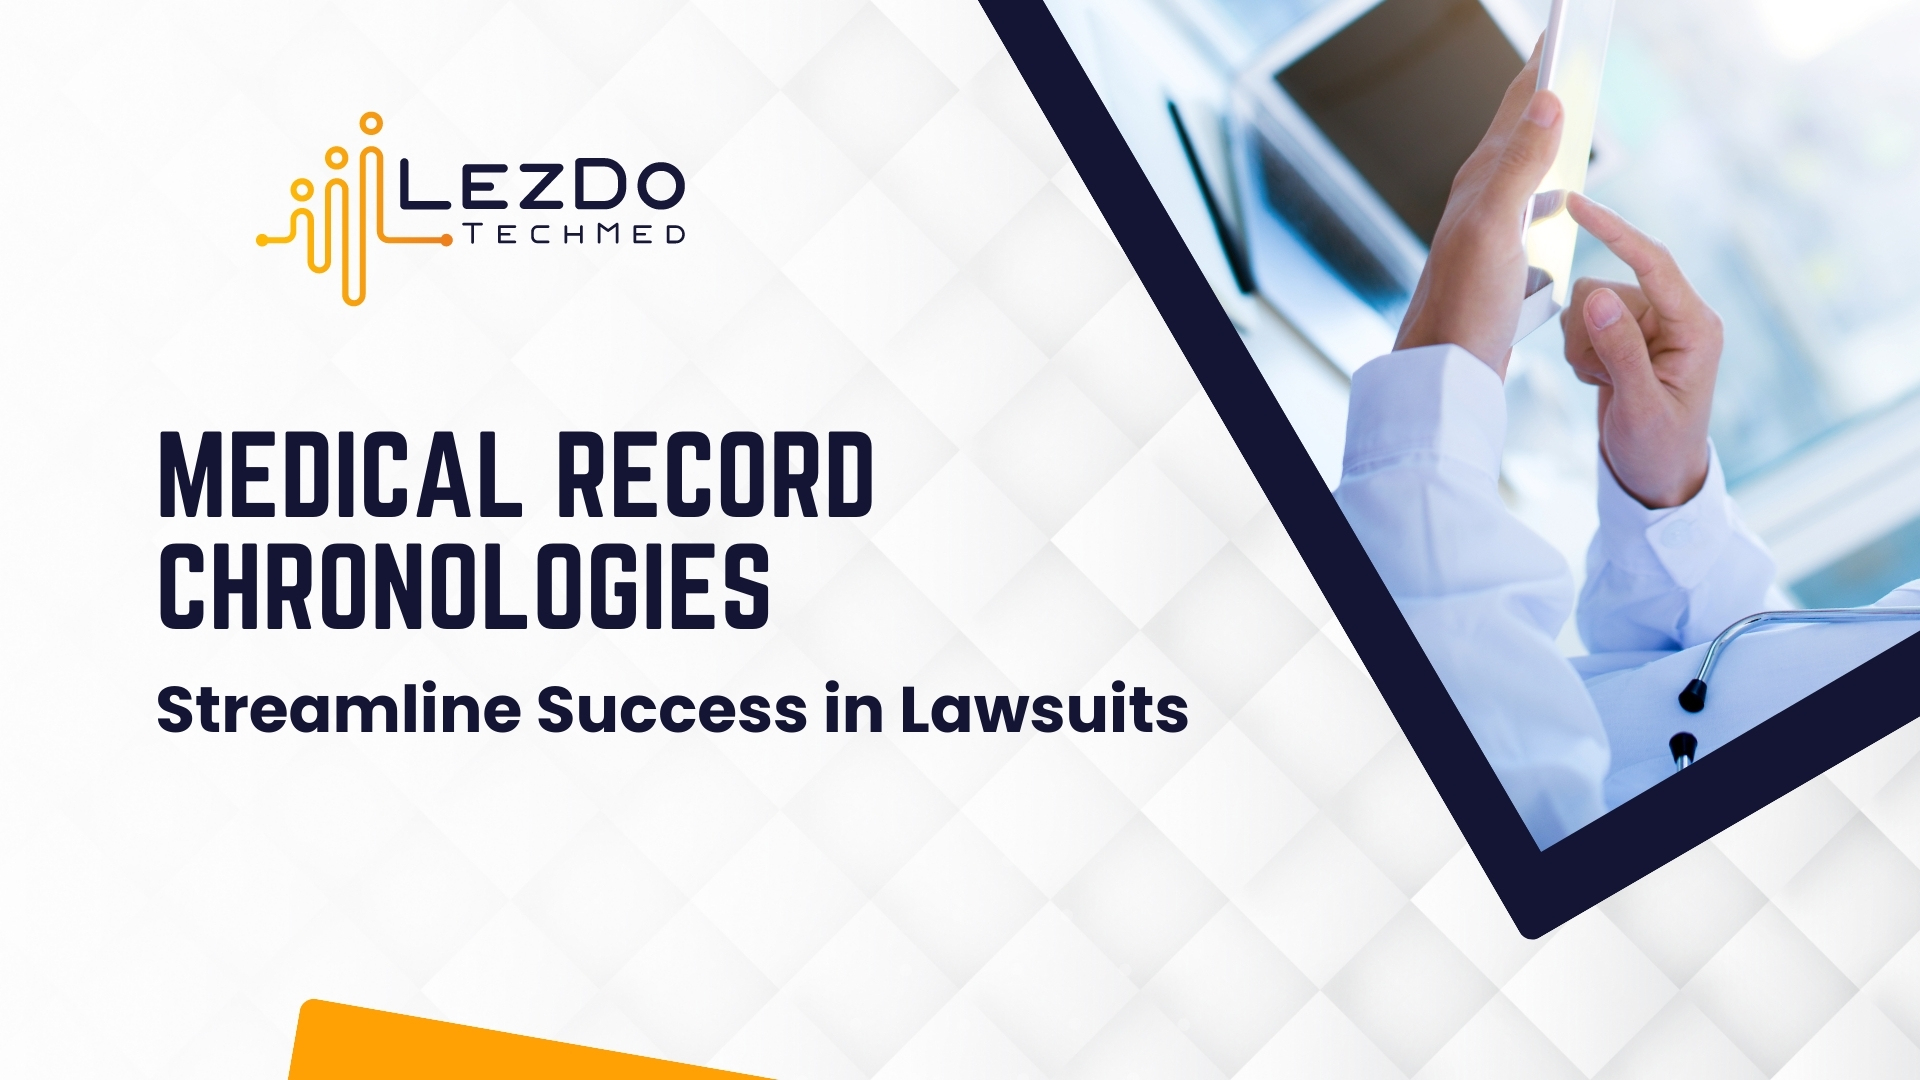 Medical Record Chronologies Streamline Success in Lawsuits